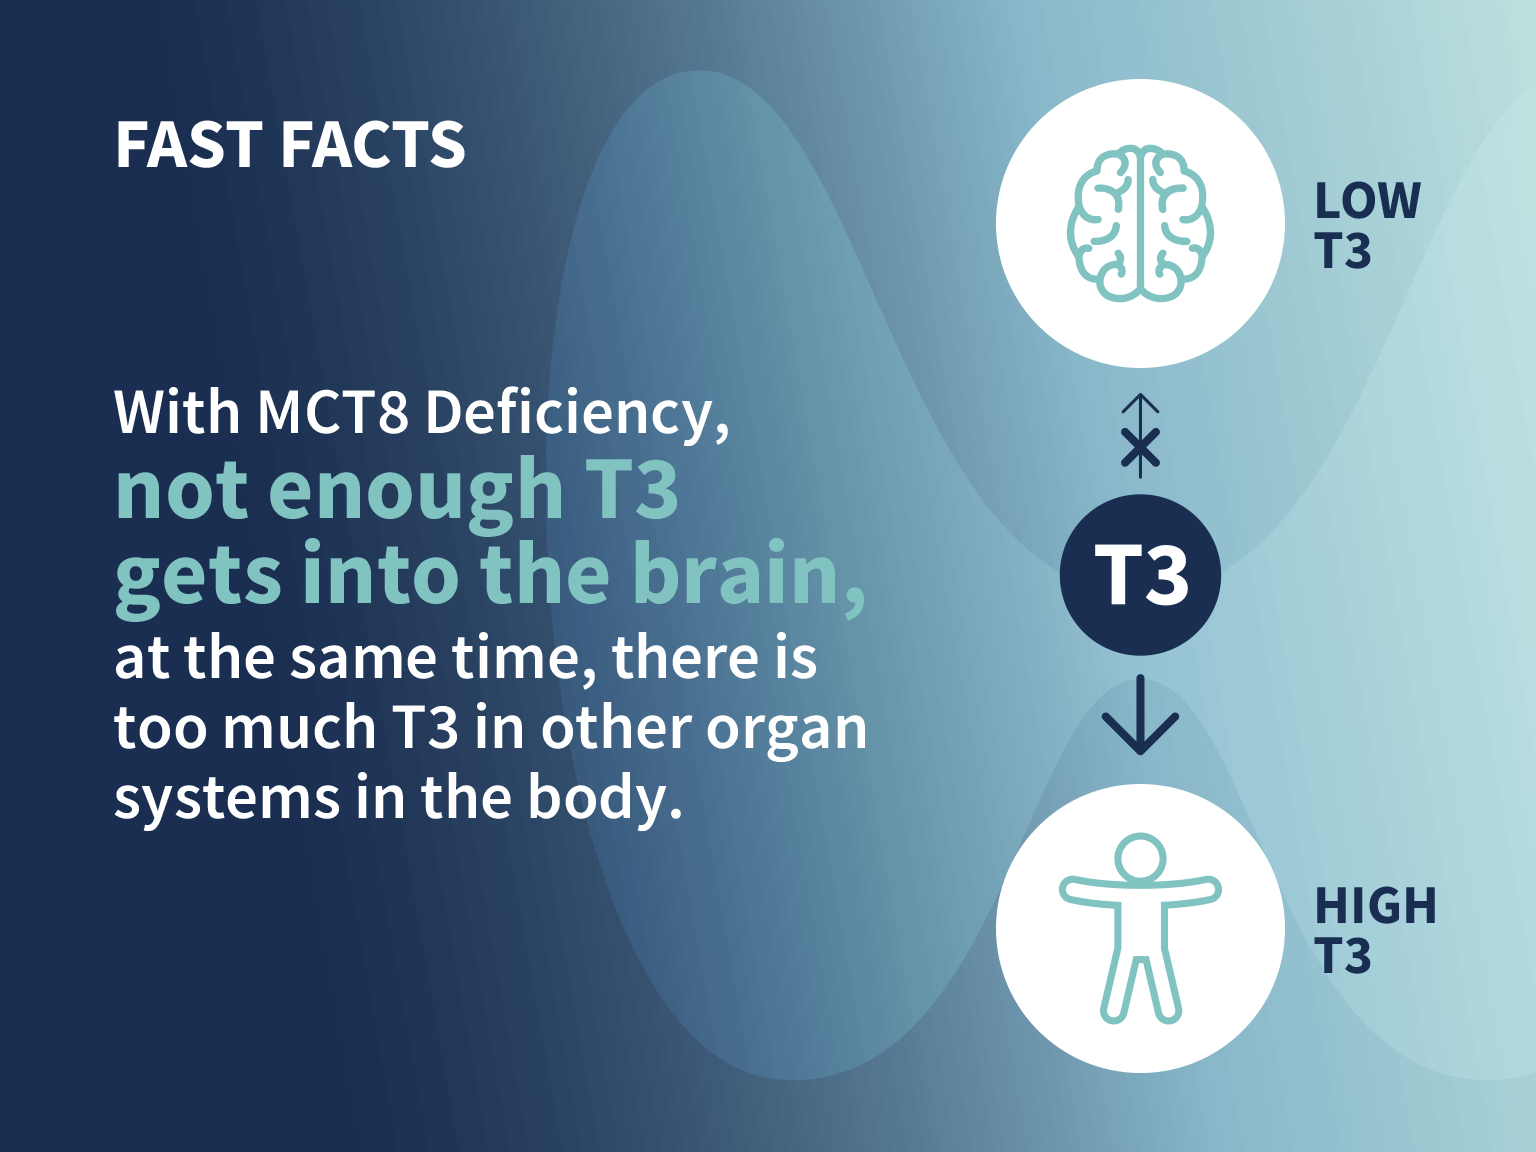 With MCT8 Deficiency, not enough T3 gets into the brain, at the same time, there is too much T3 in other organ systems in the body.